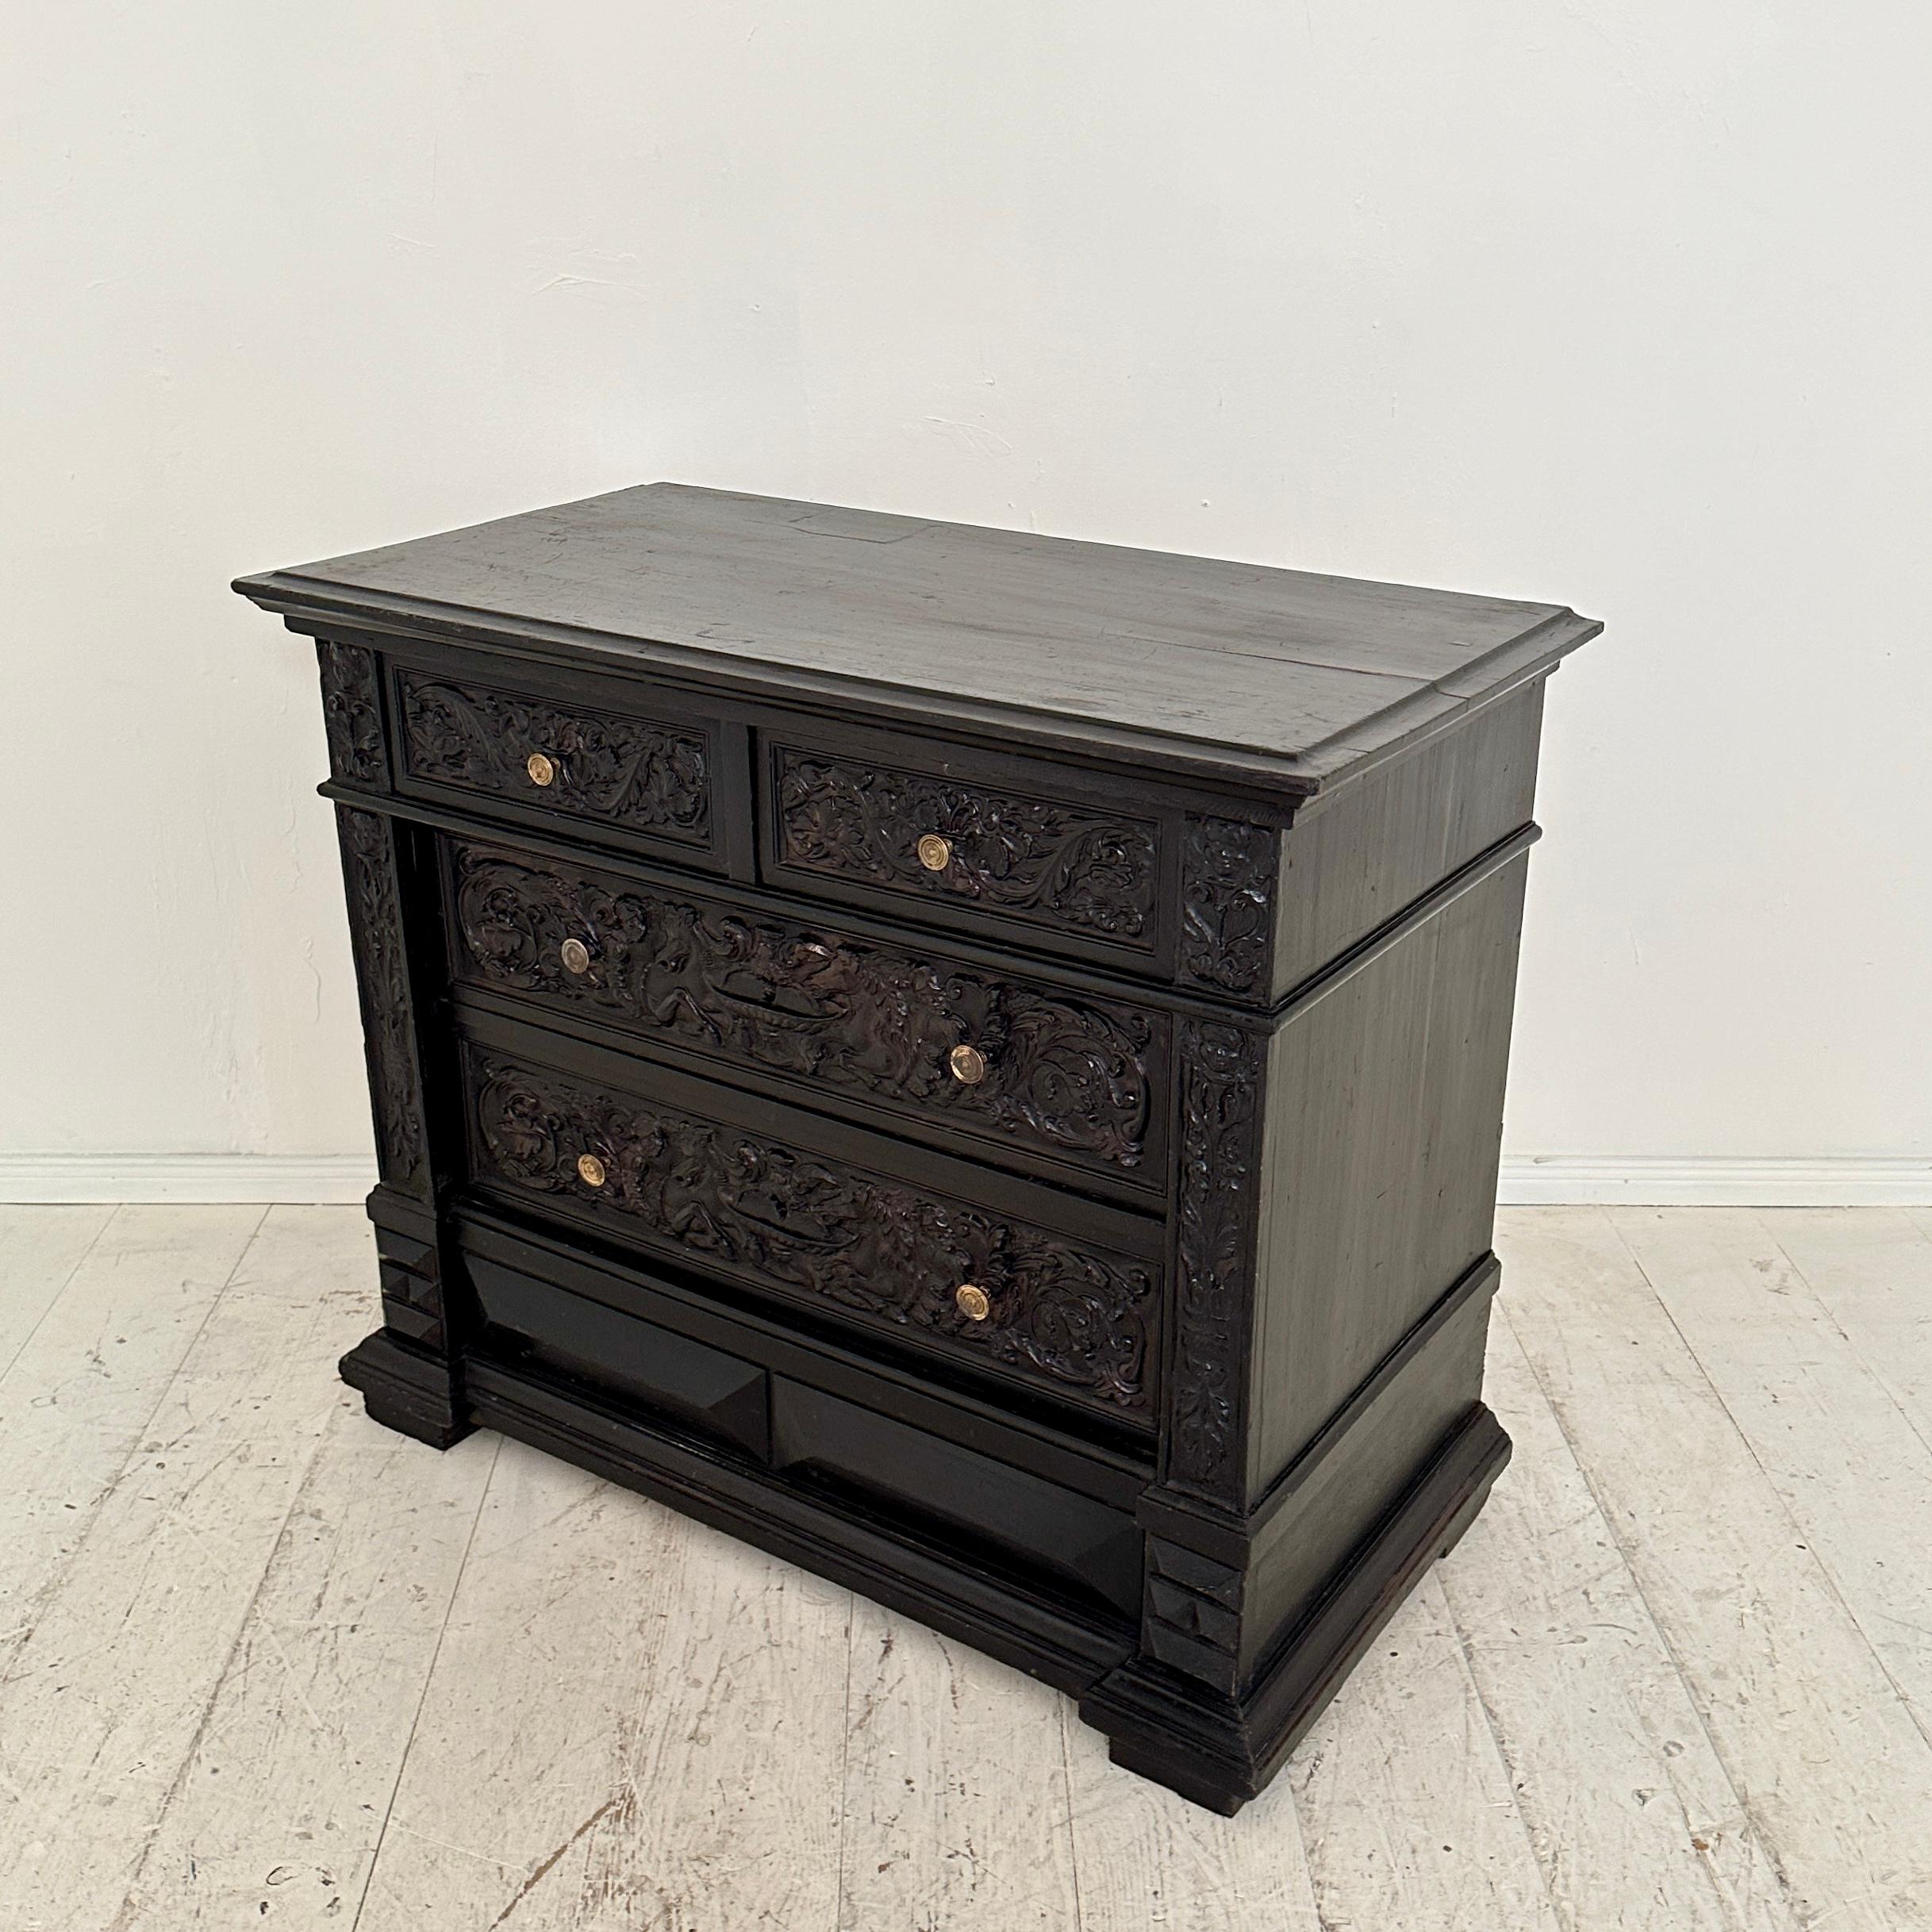 19th Century German Renaissance-Style Chest of Drawers in Black, around 1880 For Sale 3